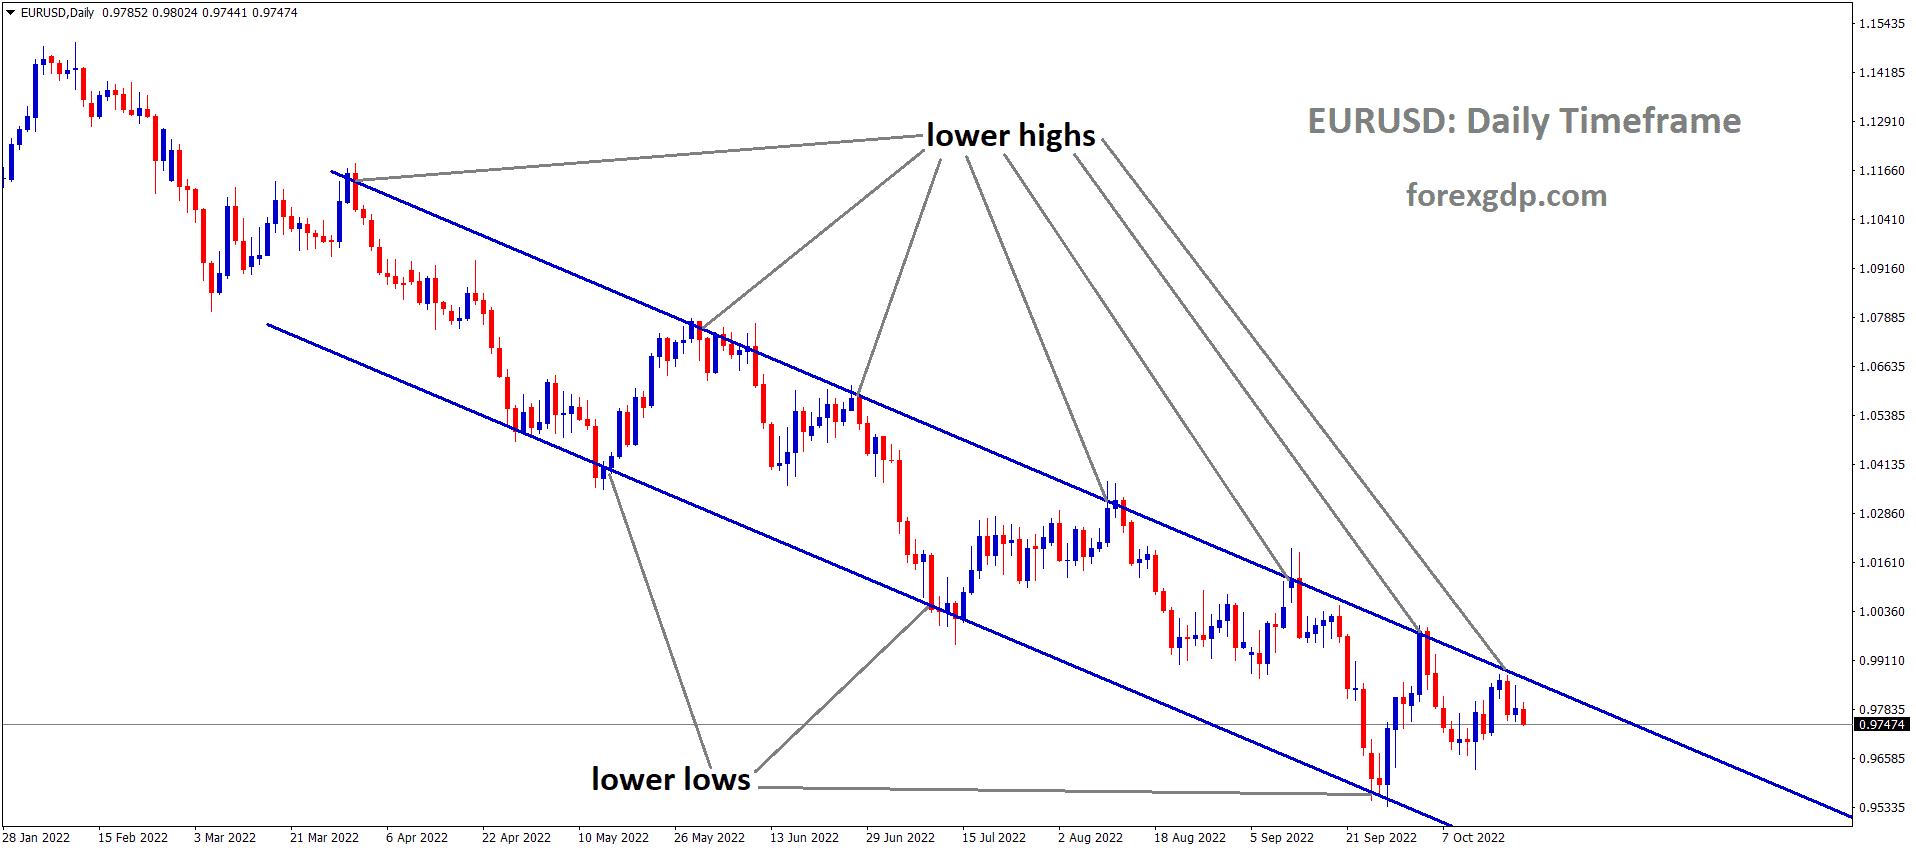 EURUSD is moving in the Descending channel and the market has fallen from the lower high area of the channel 3